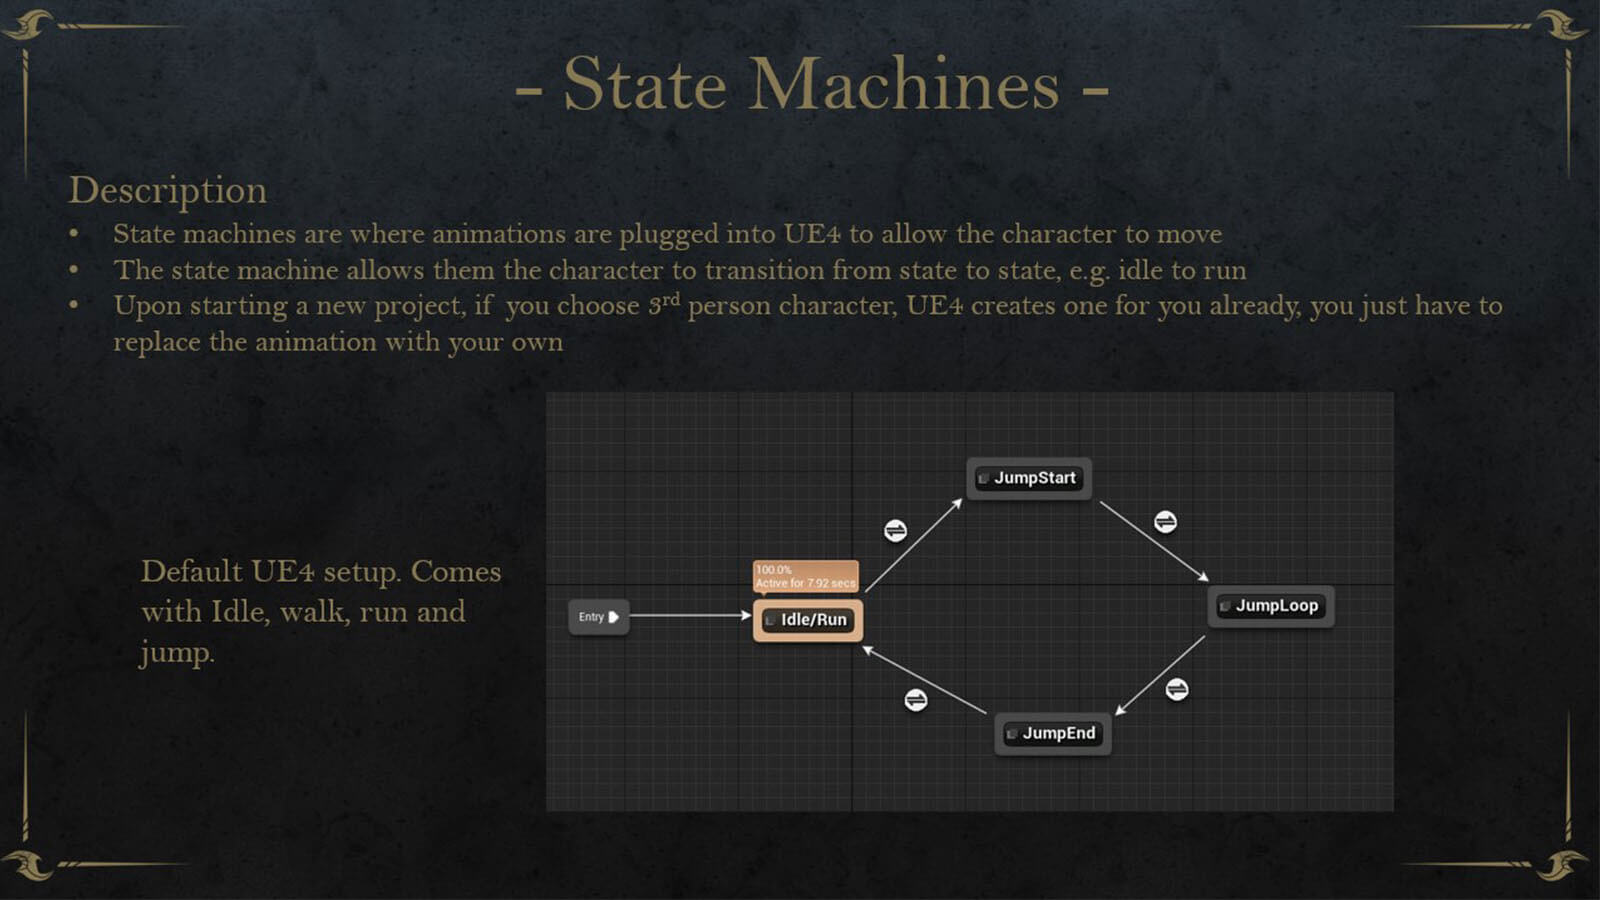 Image of Unreal Engine 4 state machine setup for character movement